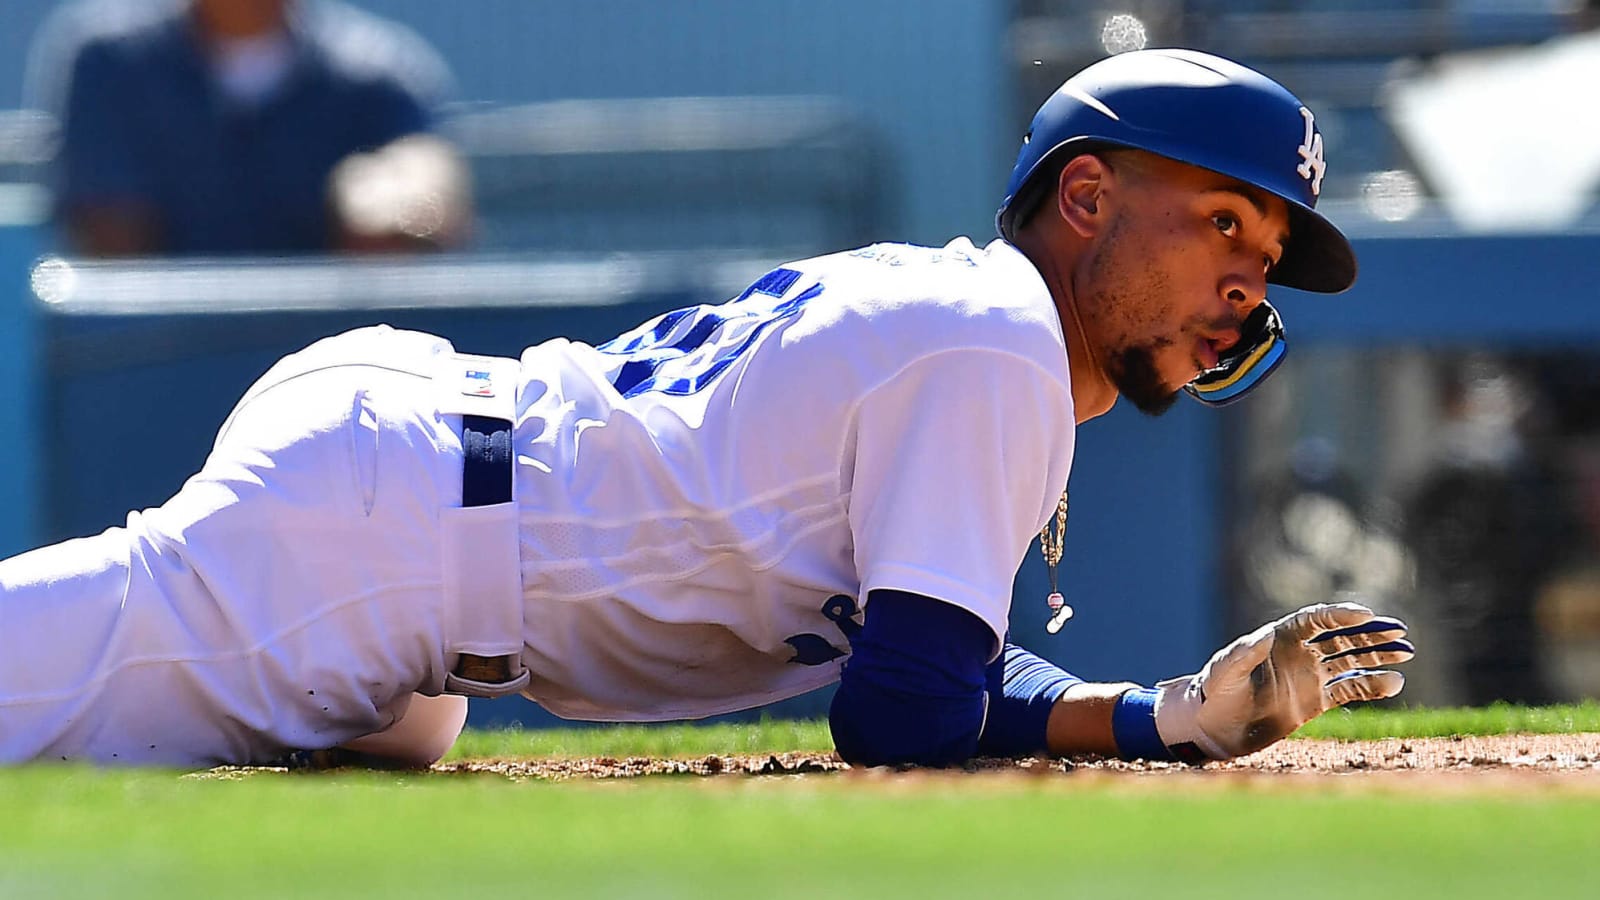 Dodgers star Mookie Betts headed to IL with cracked rib